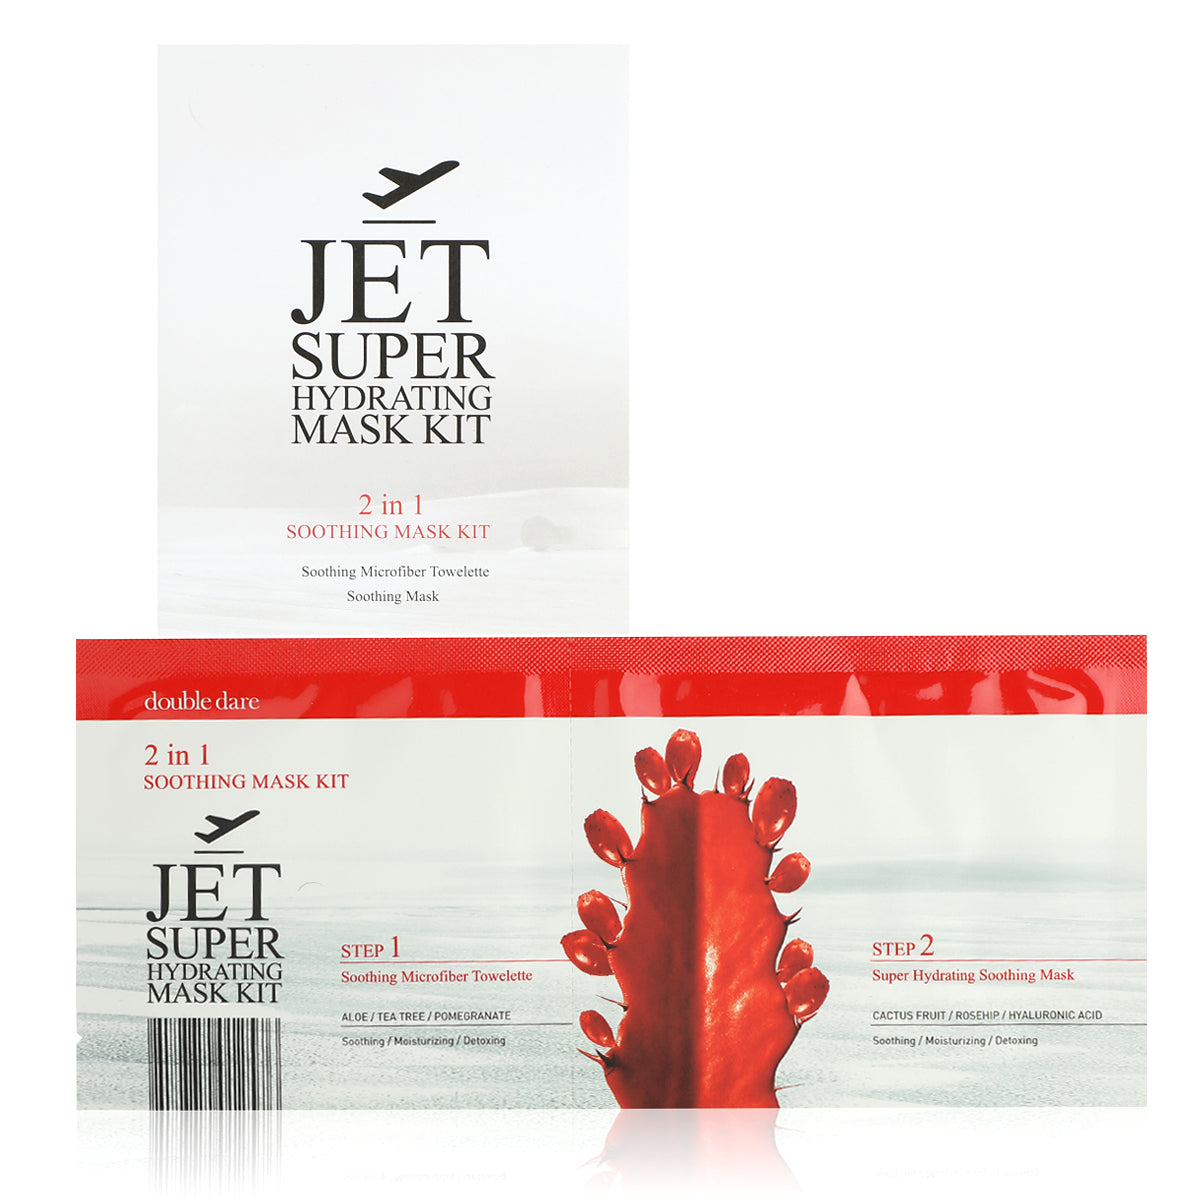 JET Super Hydrating Mask Kit 2in1 Soothing Mask Kit